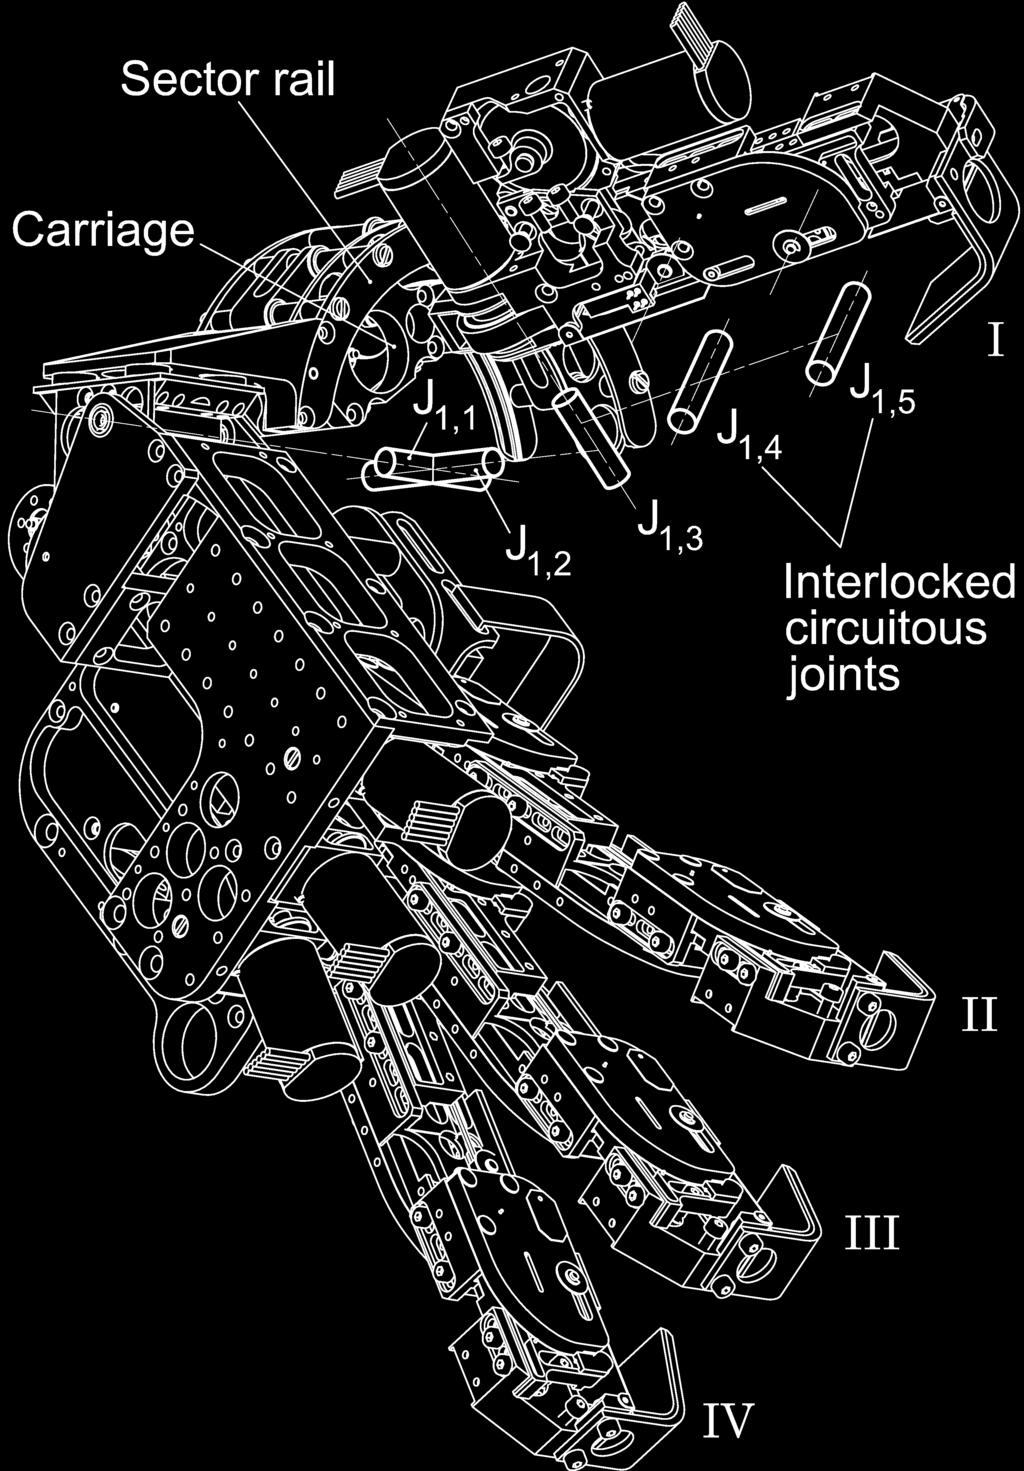 By the way, the nomenclature of each joint is same as shown in the Fig. 1. I gave four fingers to the master hand (Fig.